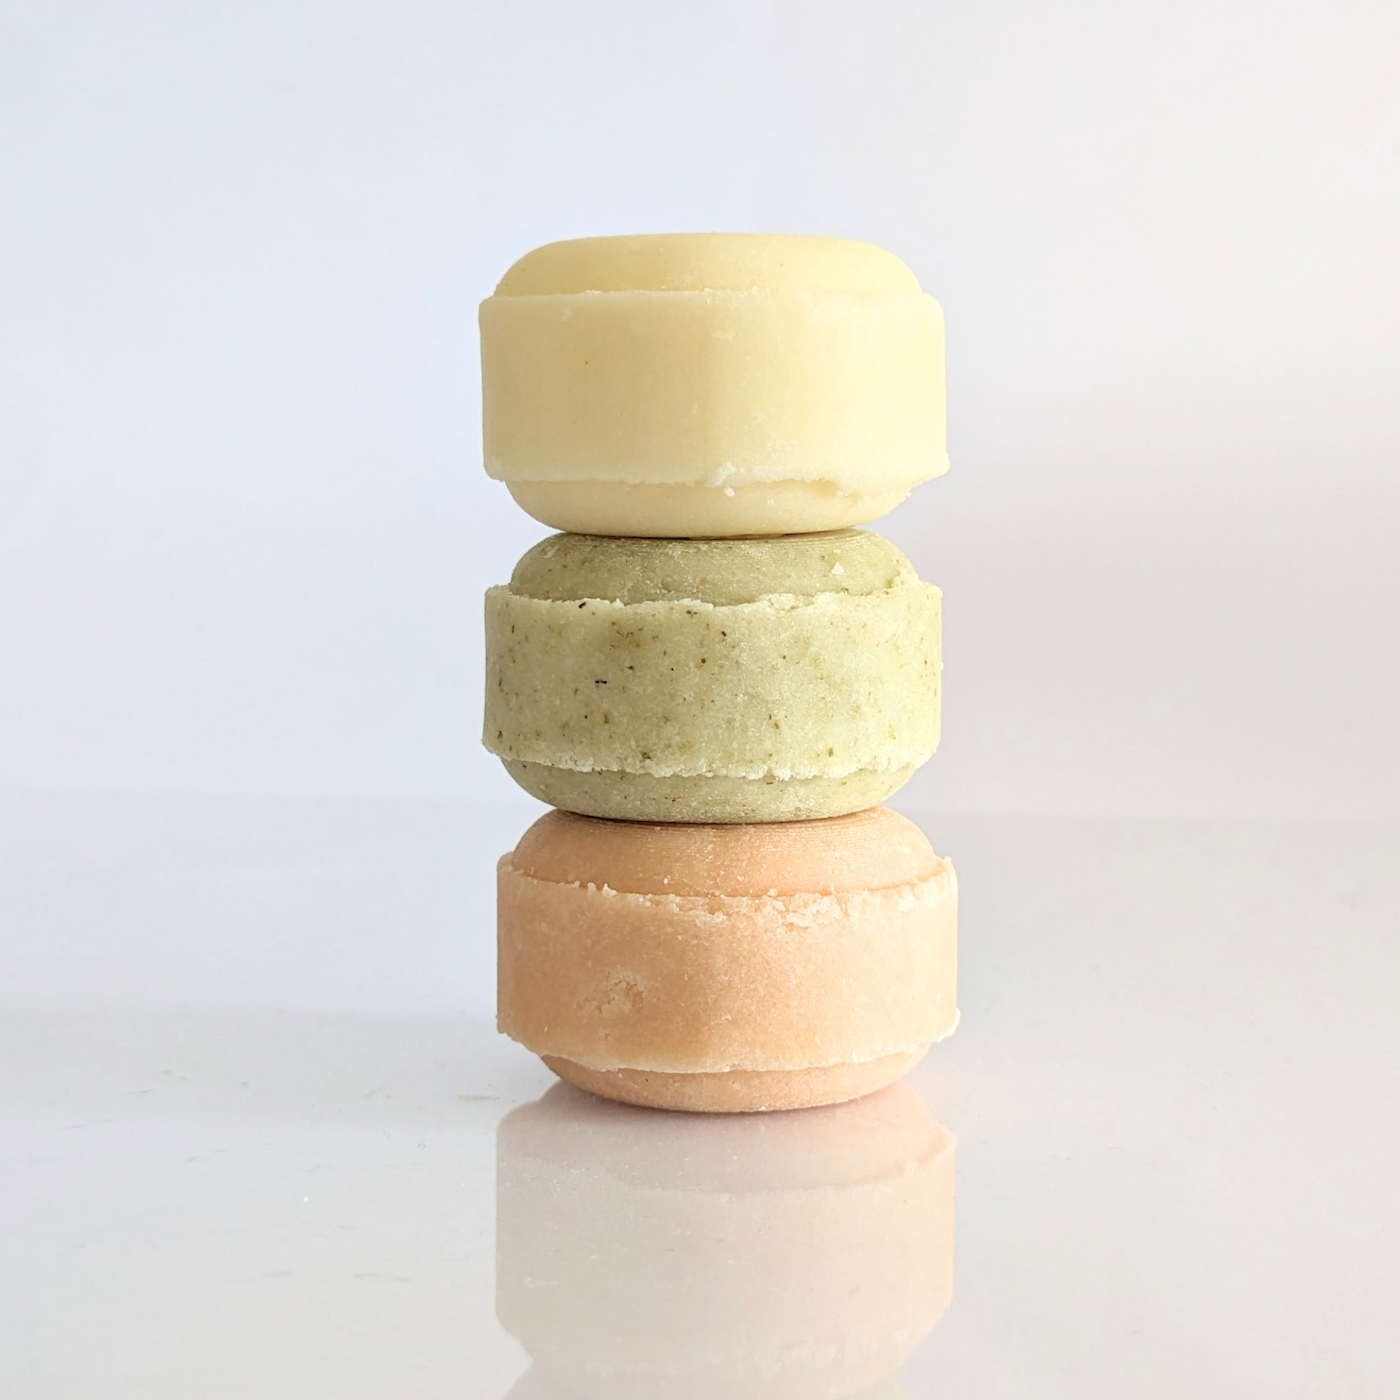 A stack of solid shampoo bars in yellow, pink and green